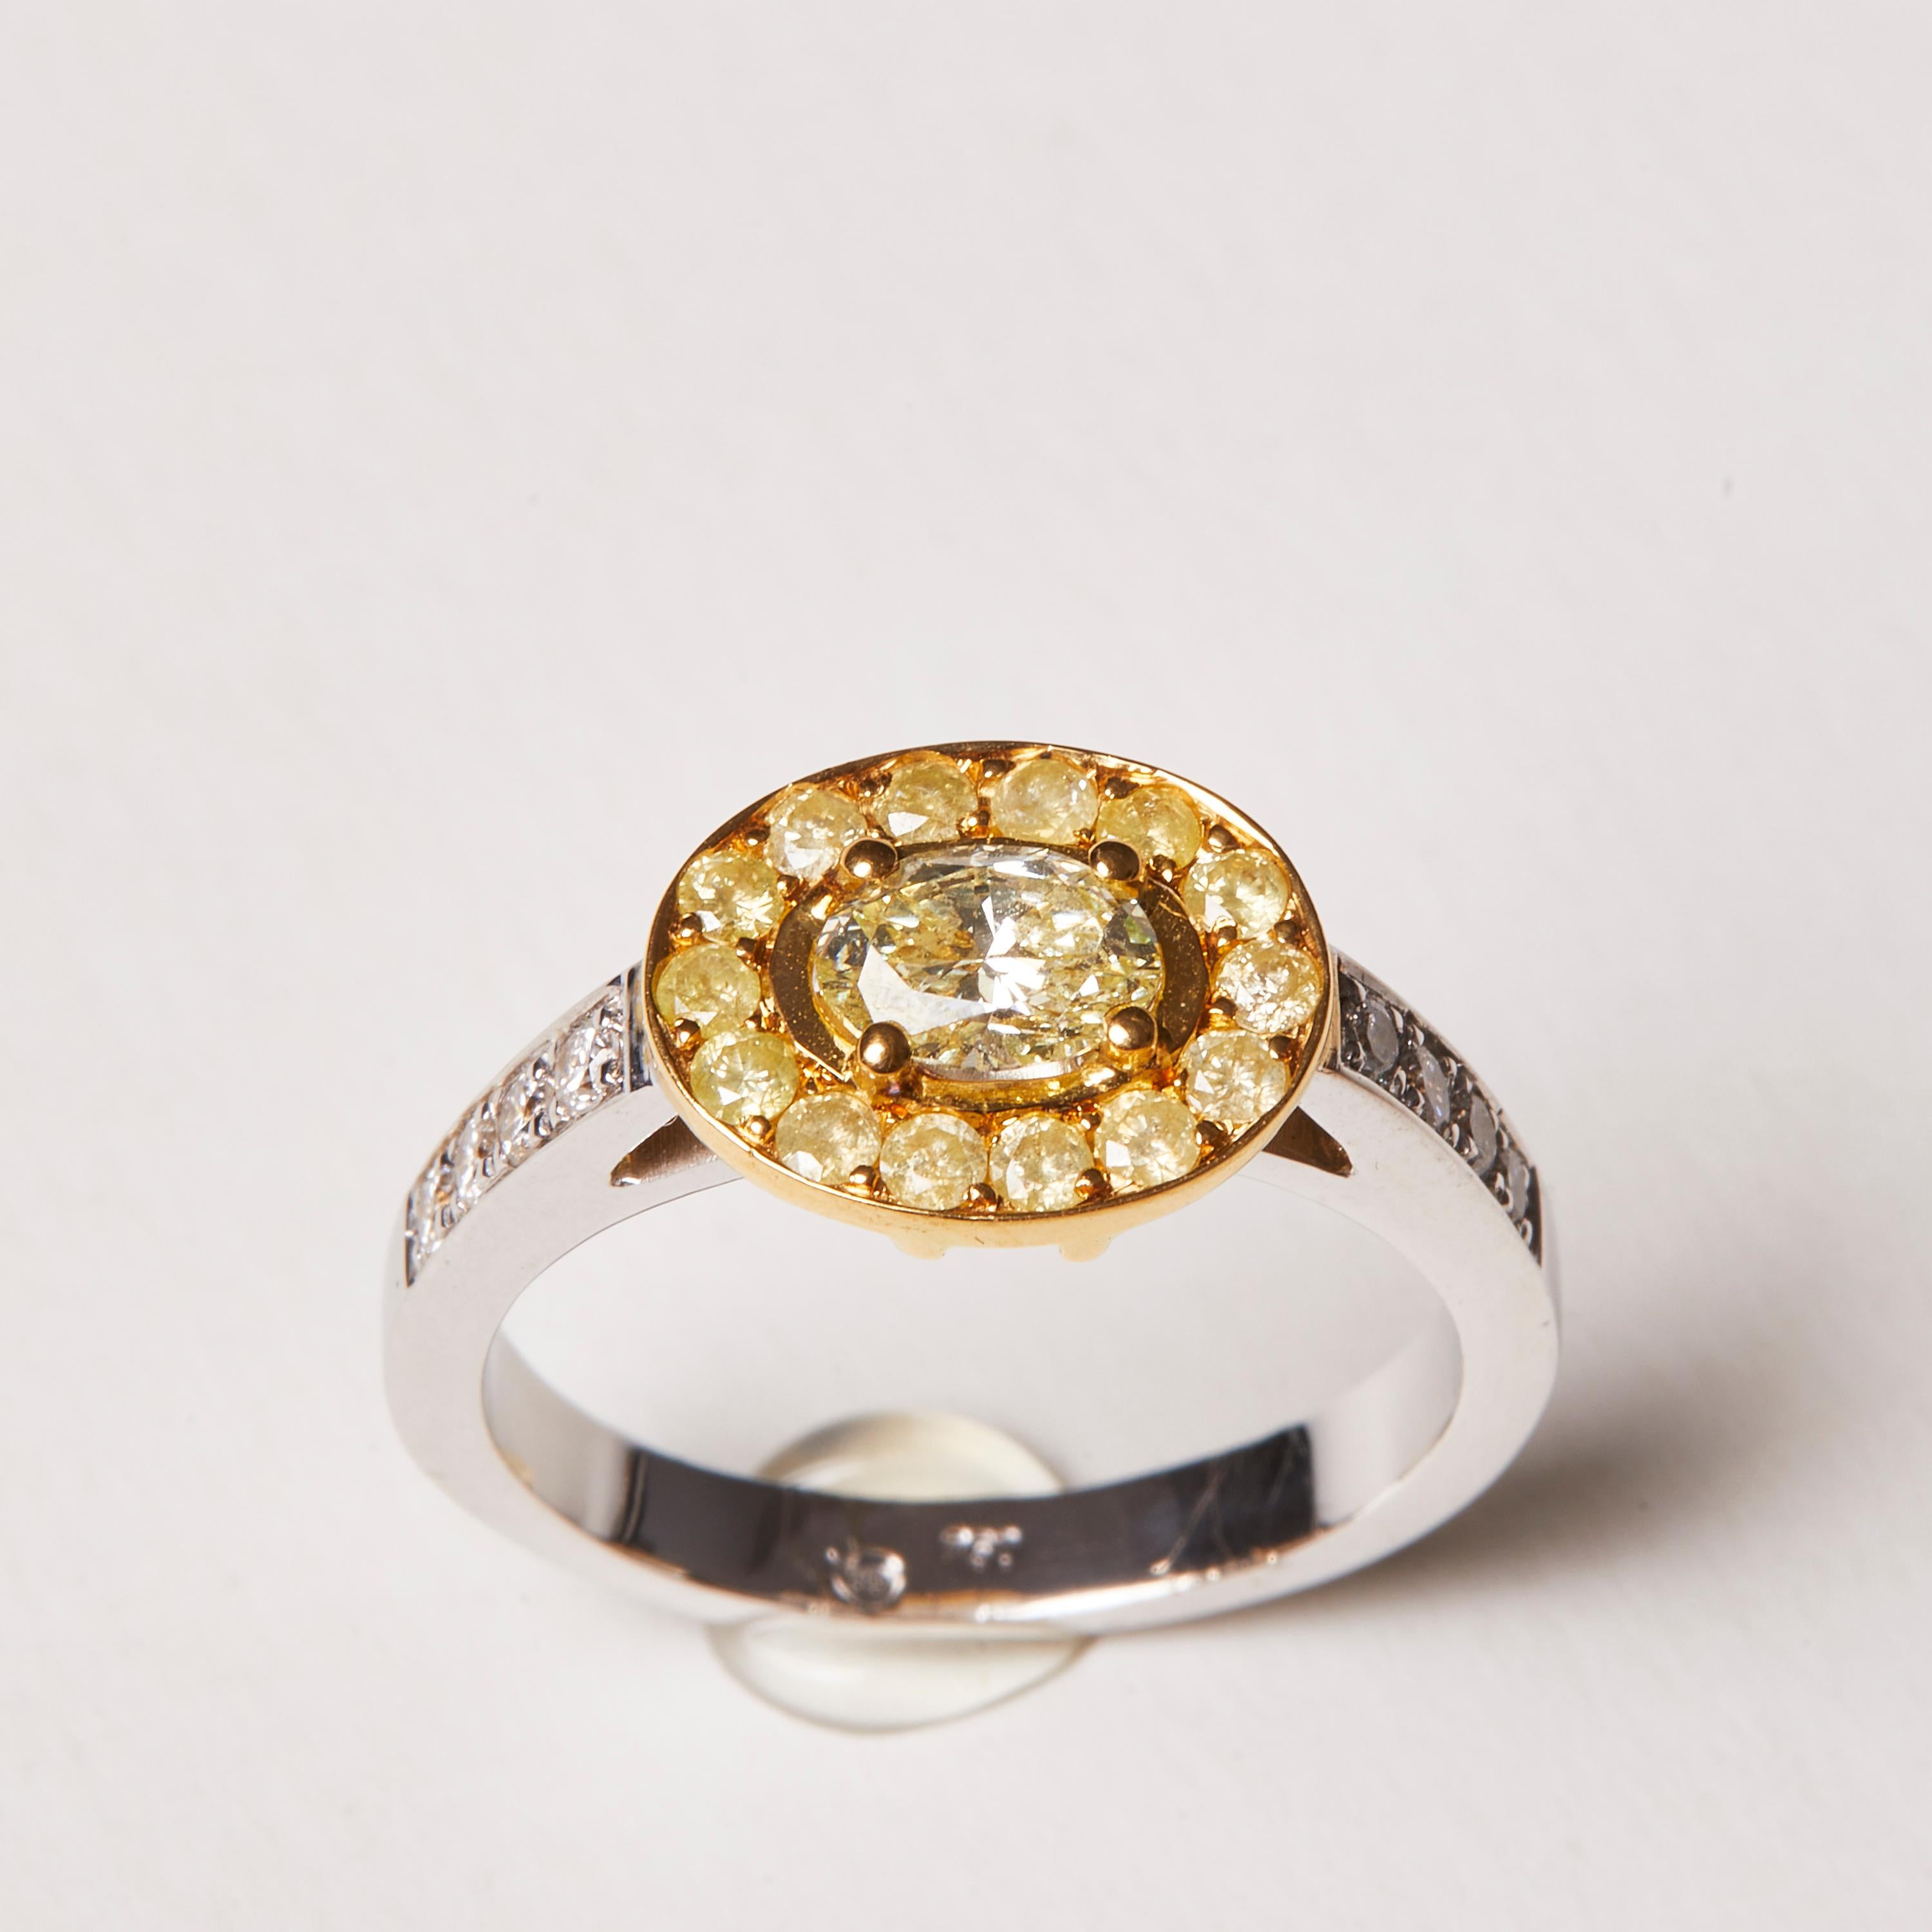 This beautiful 18 Karat white and yellow gold ring will be your next go-to piece. Embellished with 23 Diamonds - this ring combines the beauty of a fancy yellow diamond centre stone and 14 ice yellow diamonds in the halo.


8 Diamonds 0.16 Carat
1